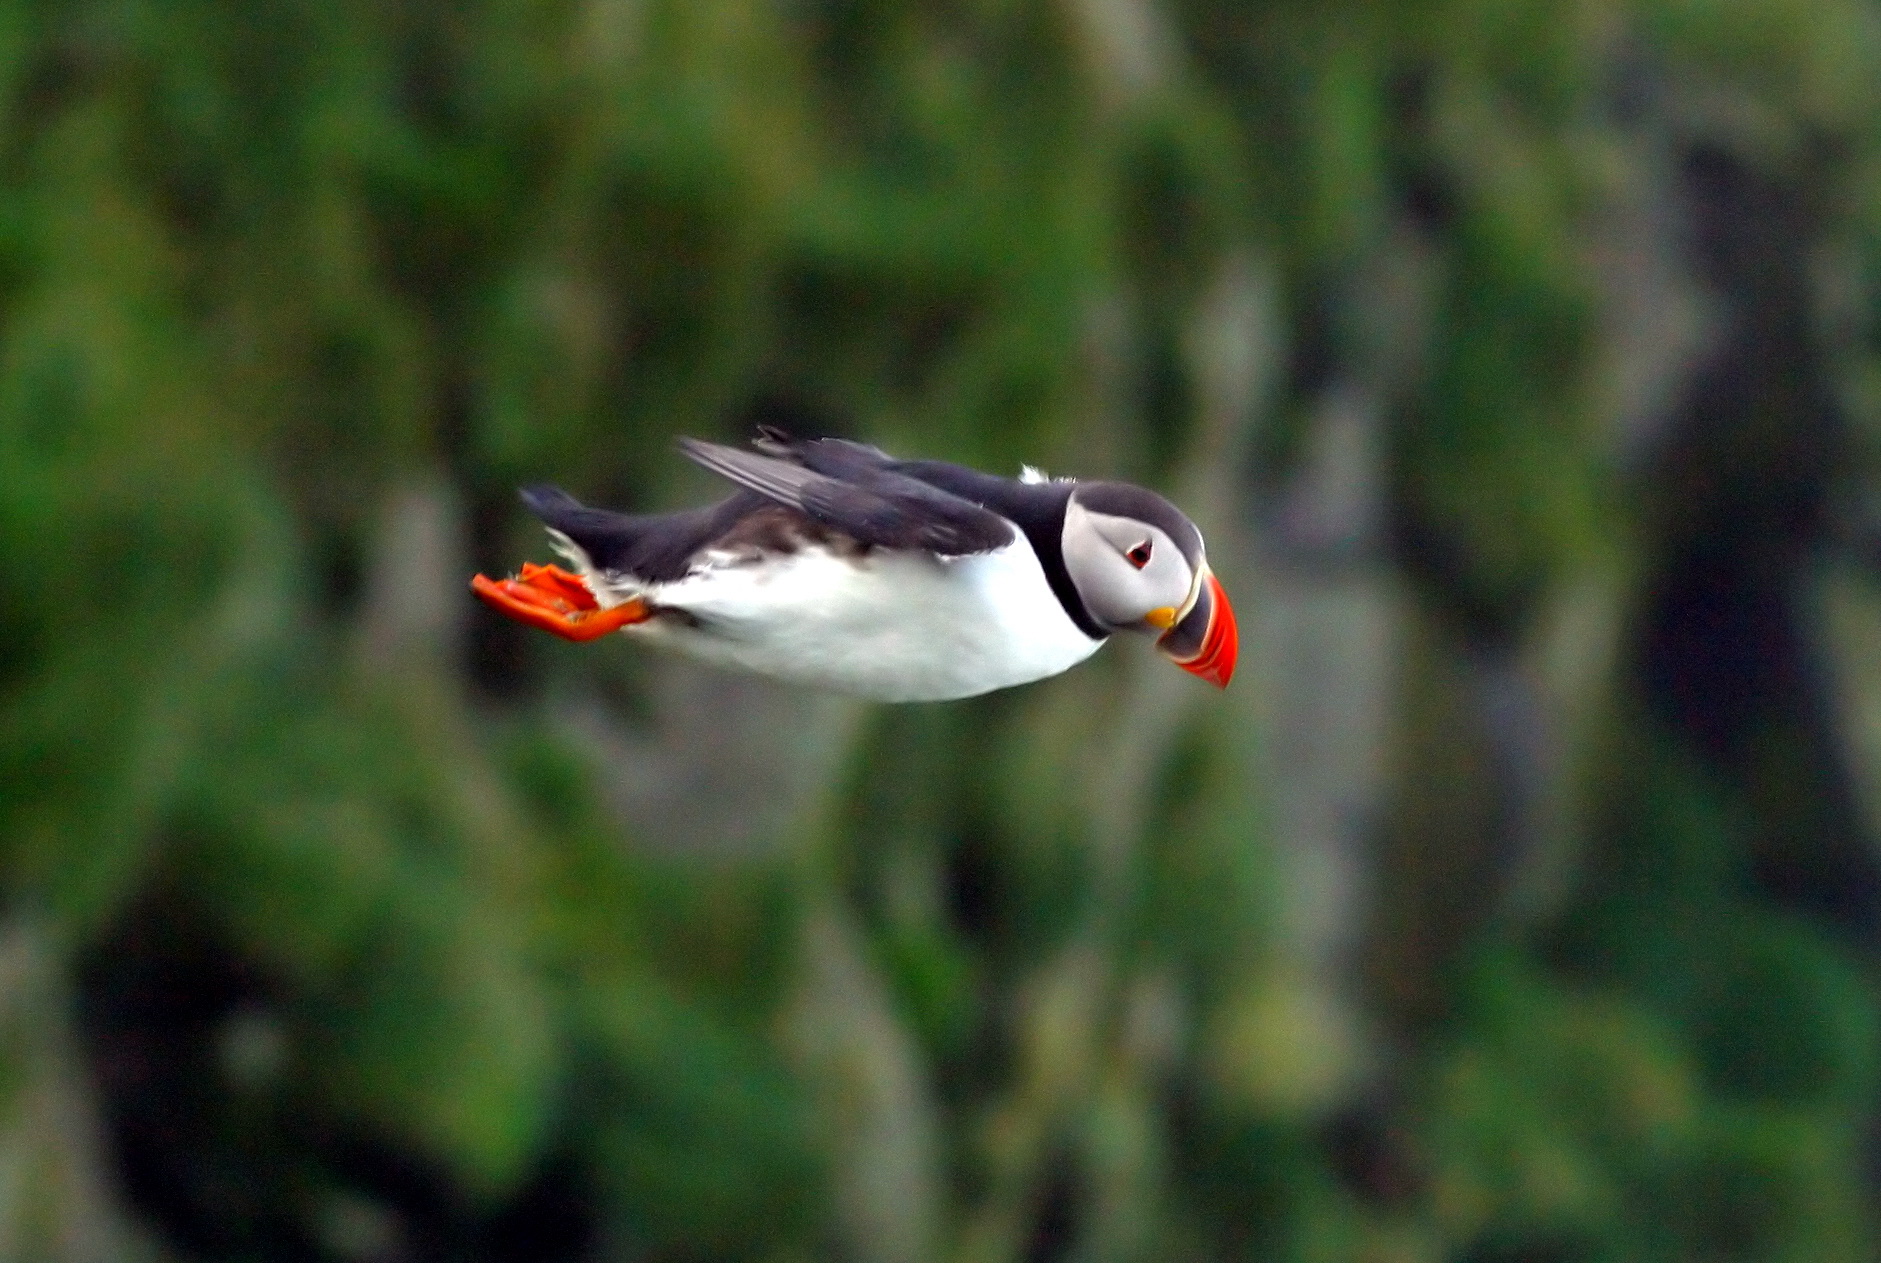 Atlantic Puffin (Fratercula arctica) - Wiki; Image ONLY